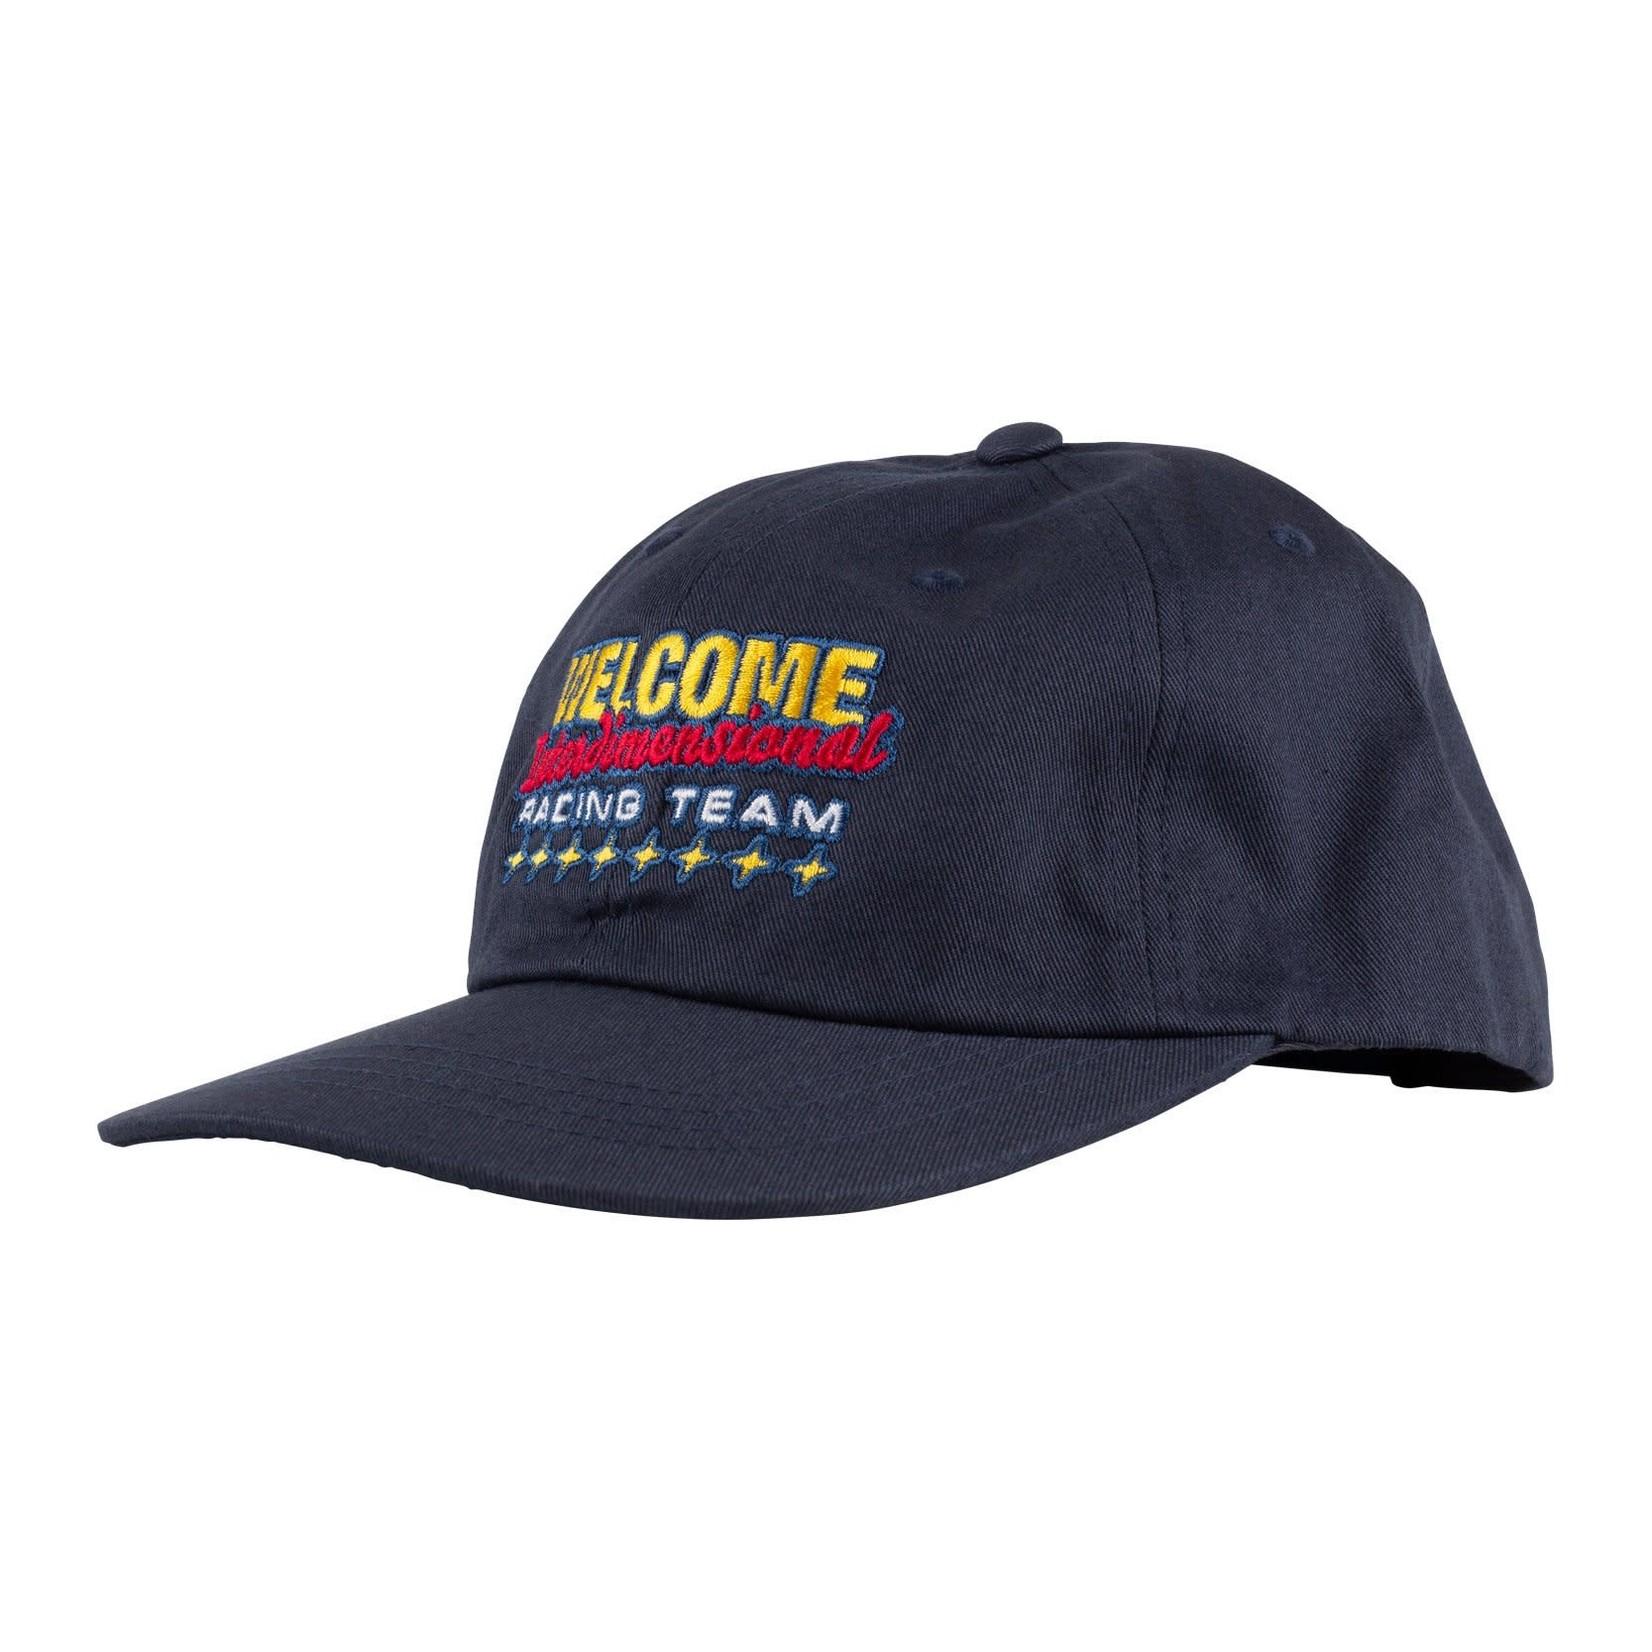 Welcome Skateboards Welcome Race Team Snapback Hat - Navy